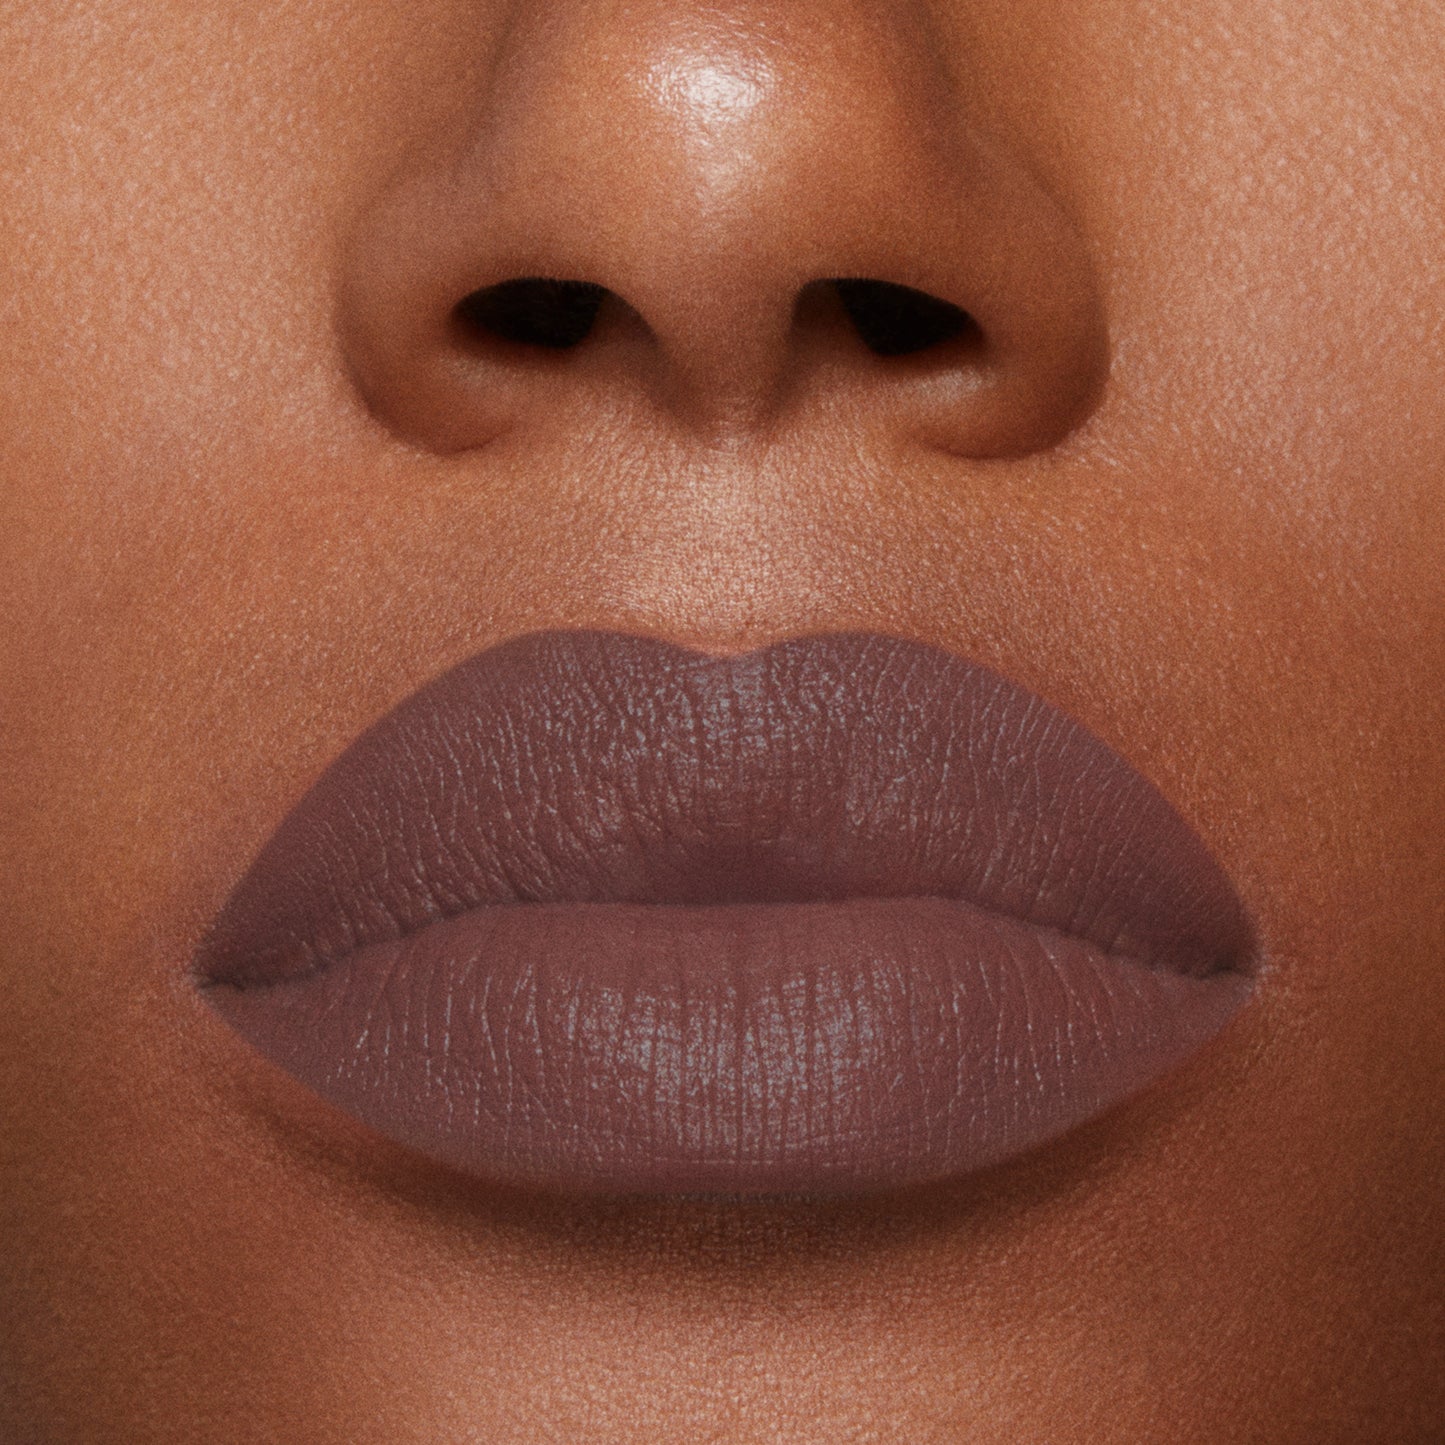 Load image into Gallery viewer, Stila Stay All Day® Matte Lip Colour - Soul Kiss
